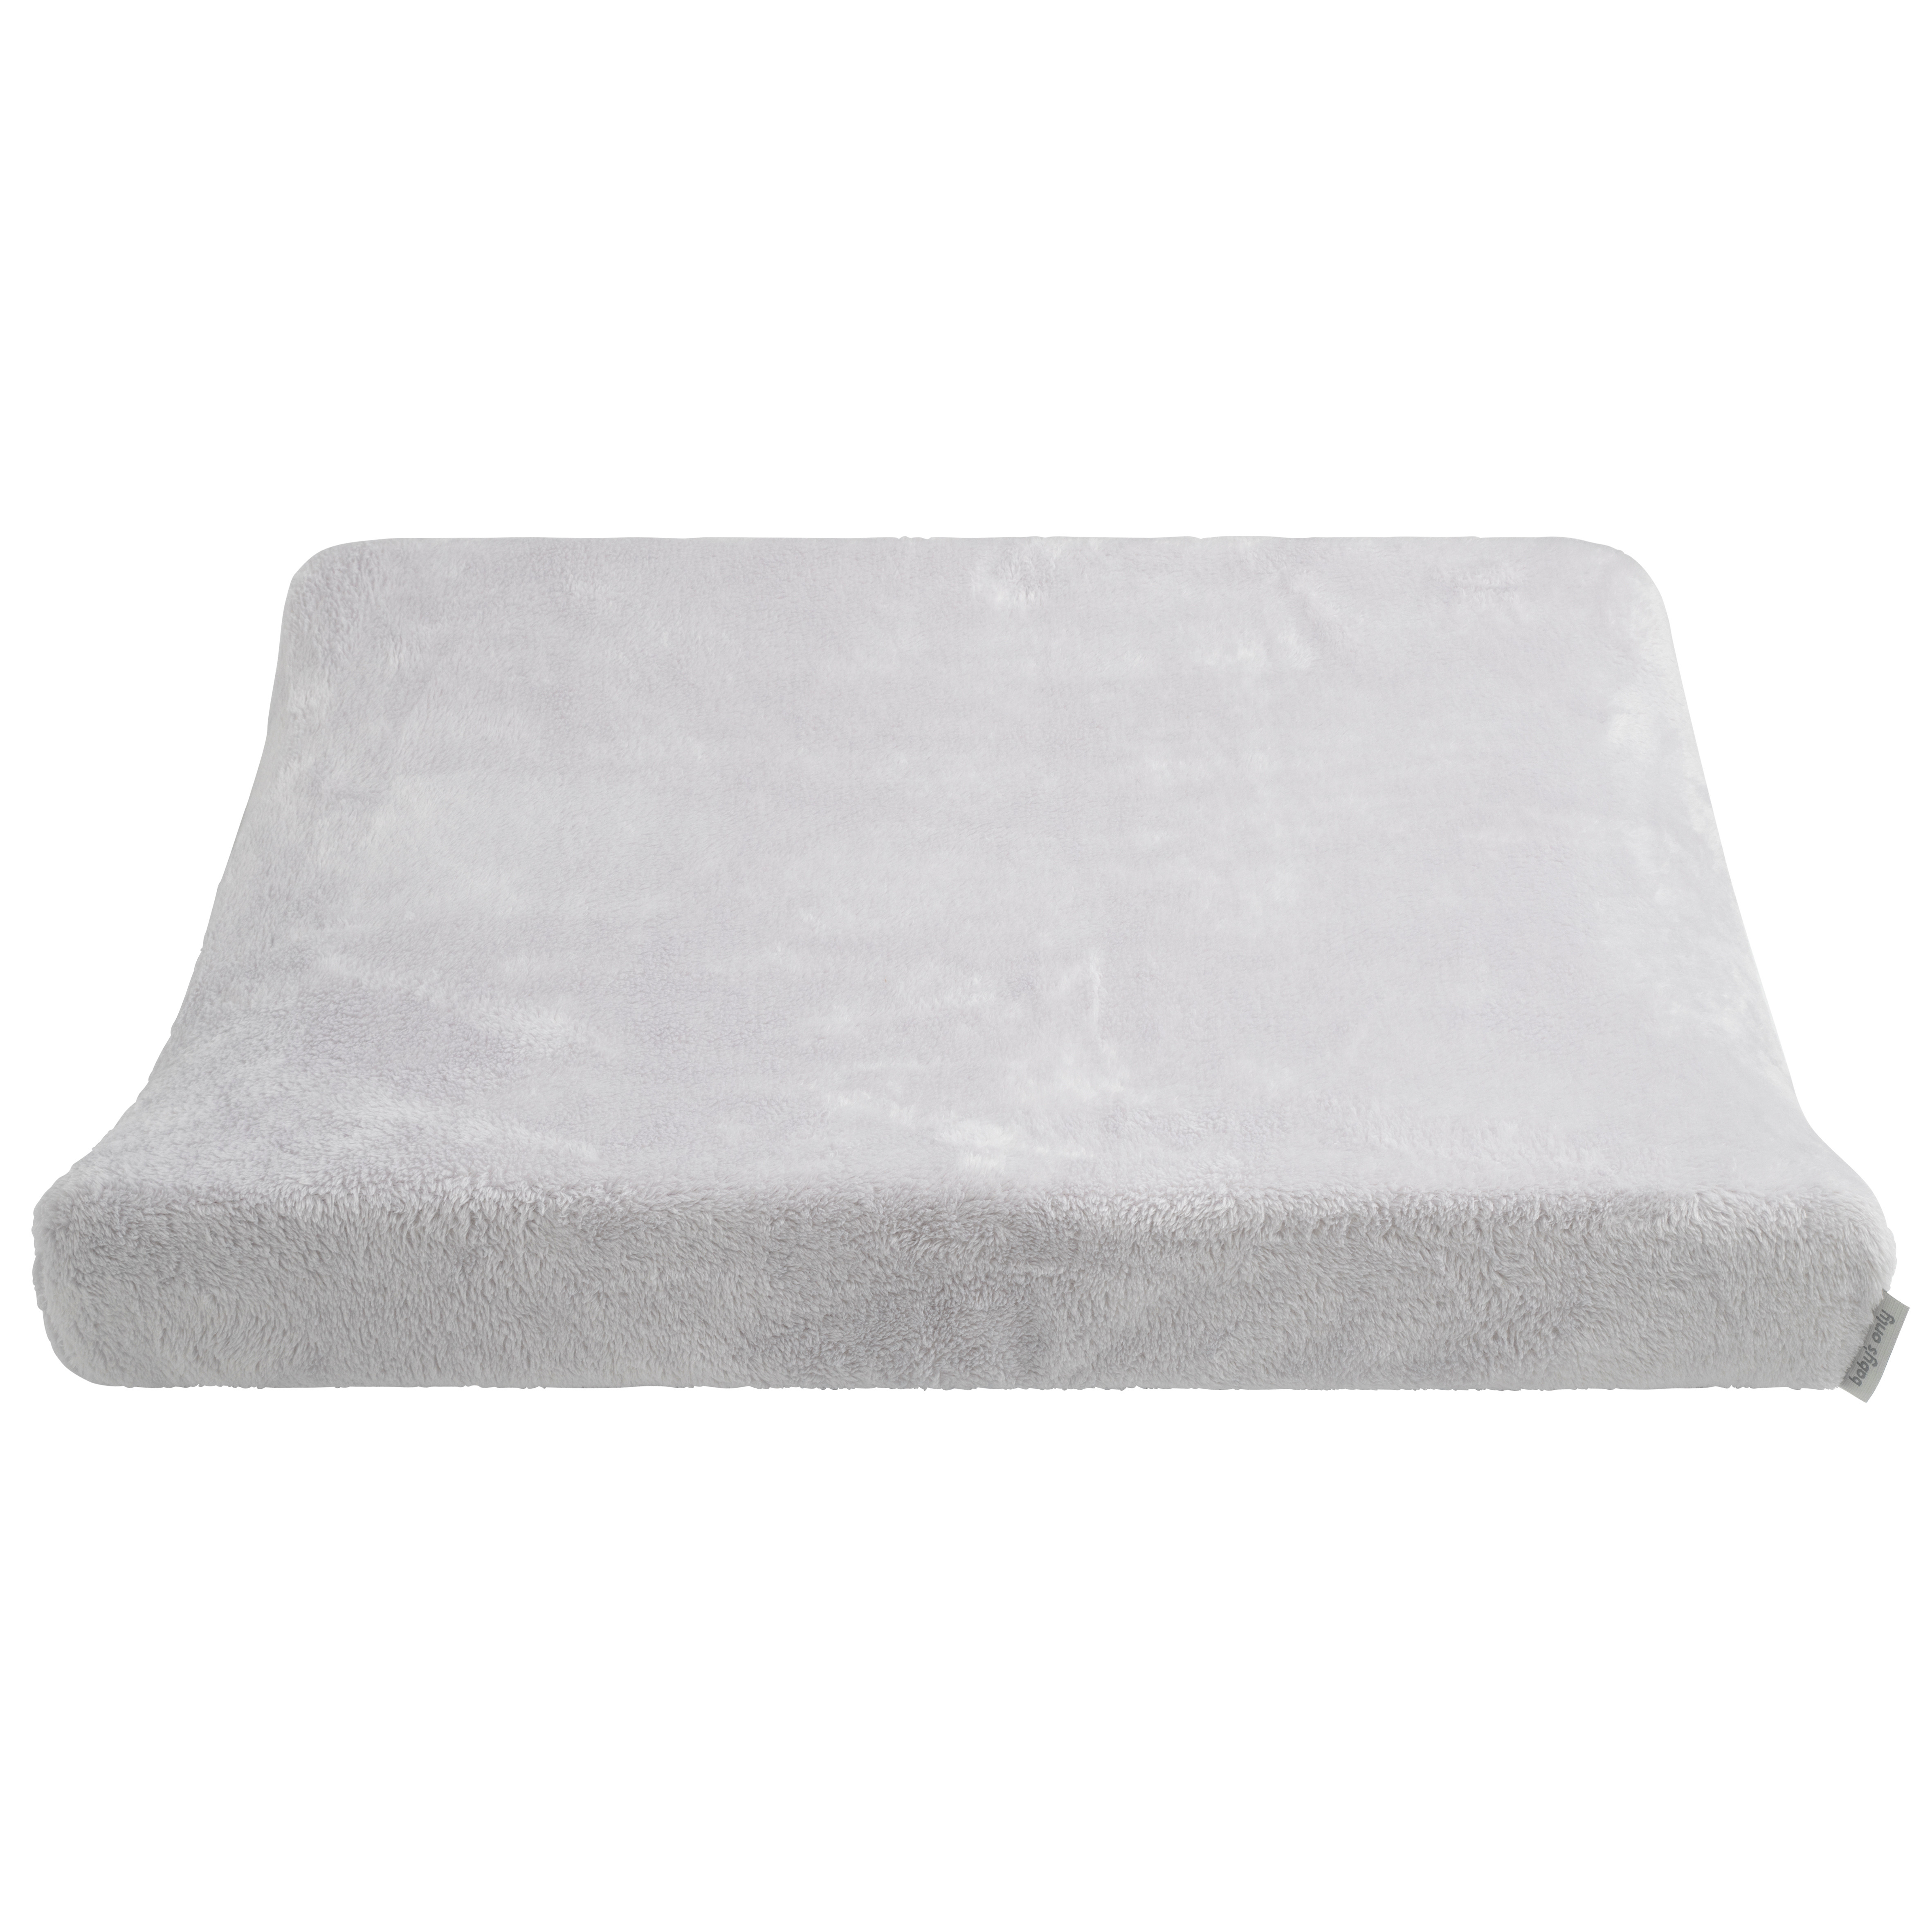 Changing pad cover Cozy dusty grey - 45x70